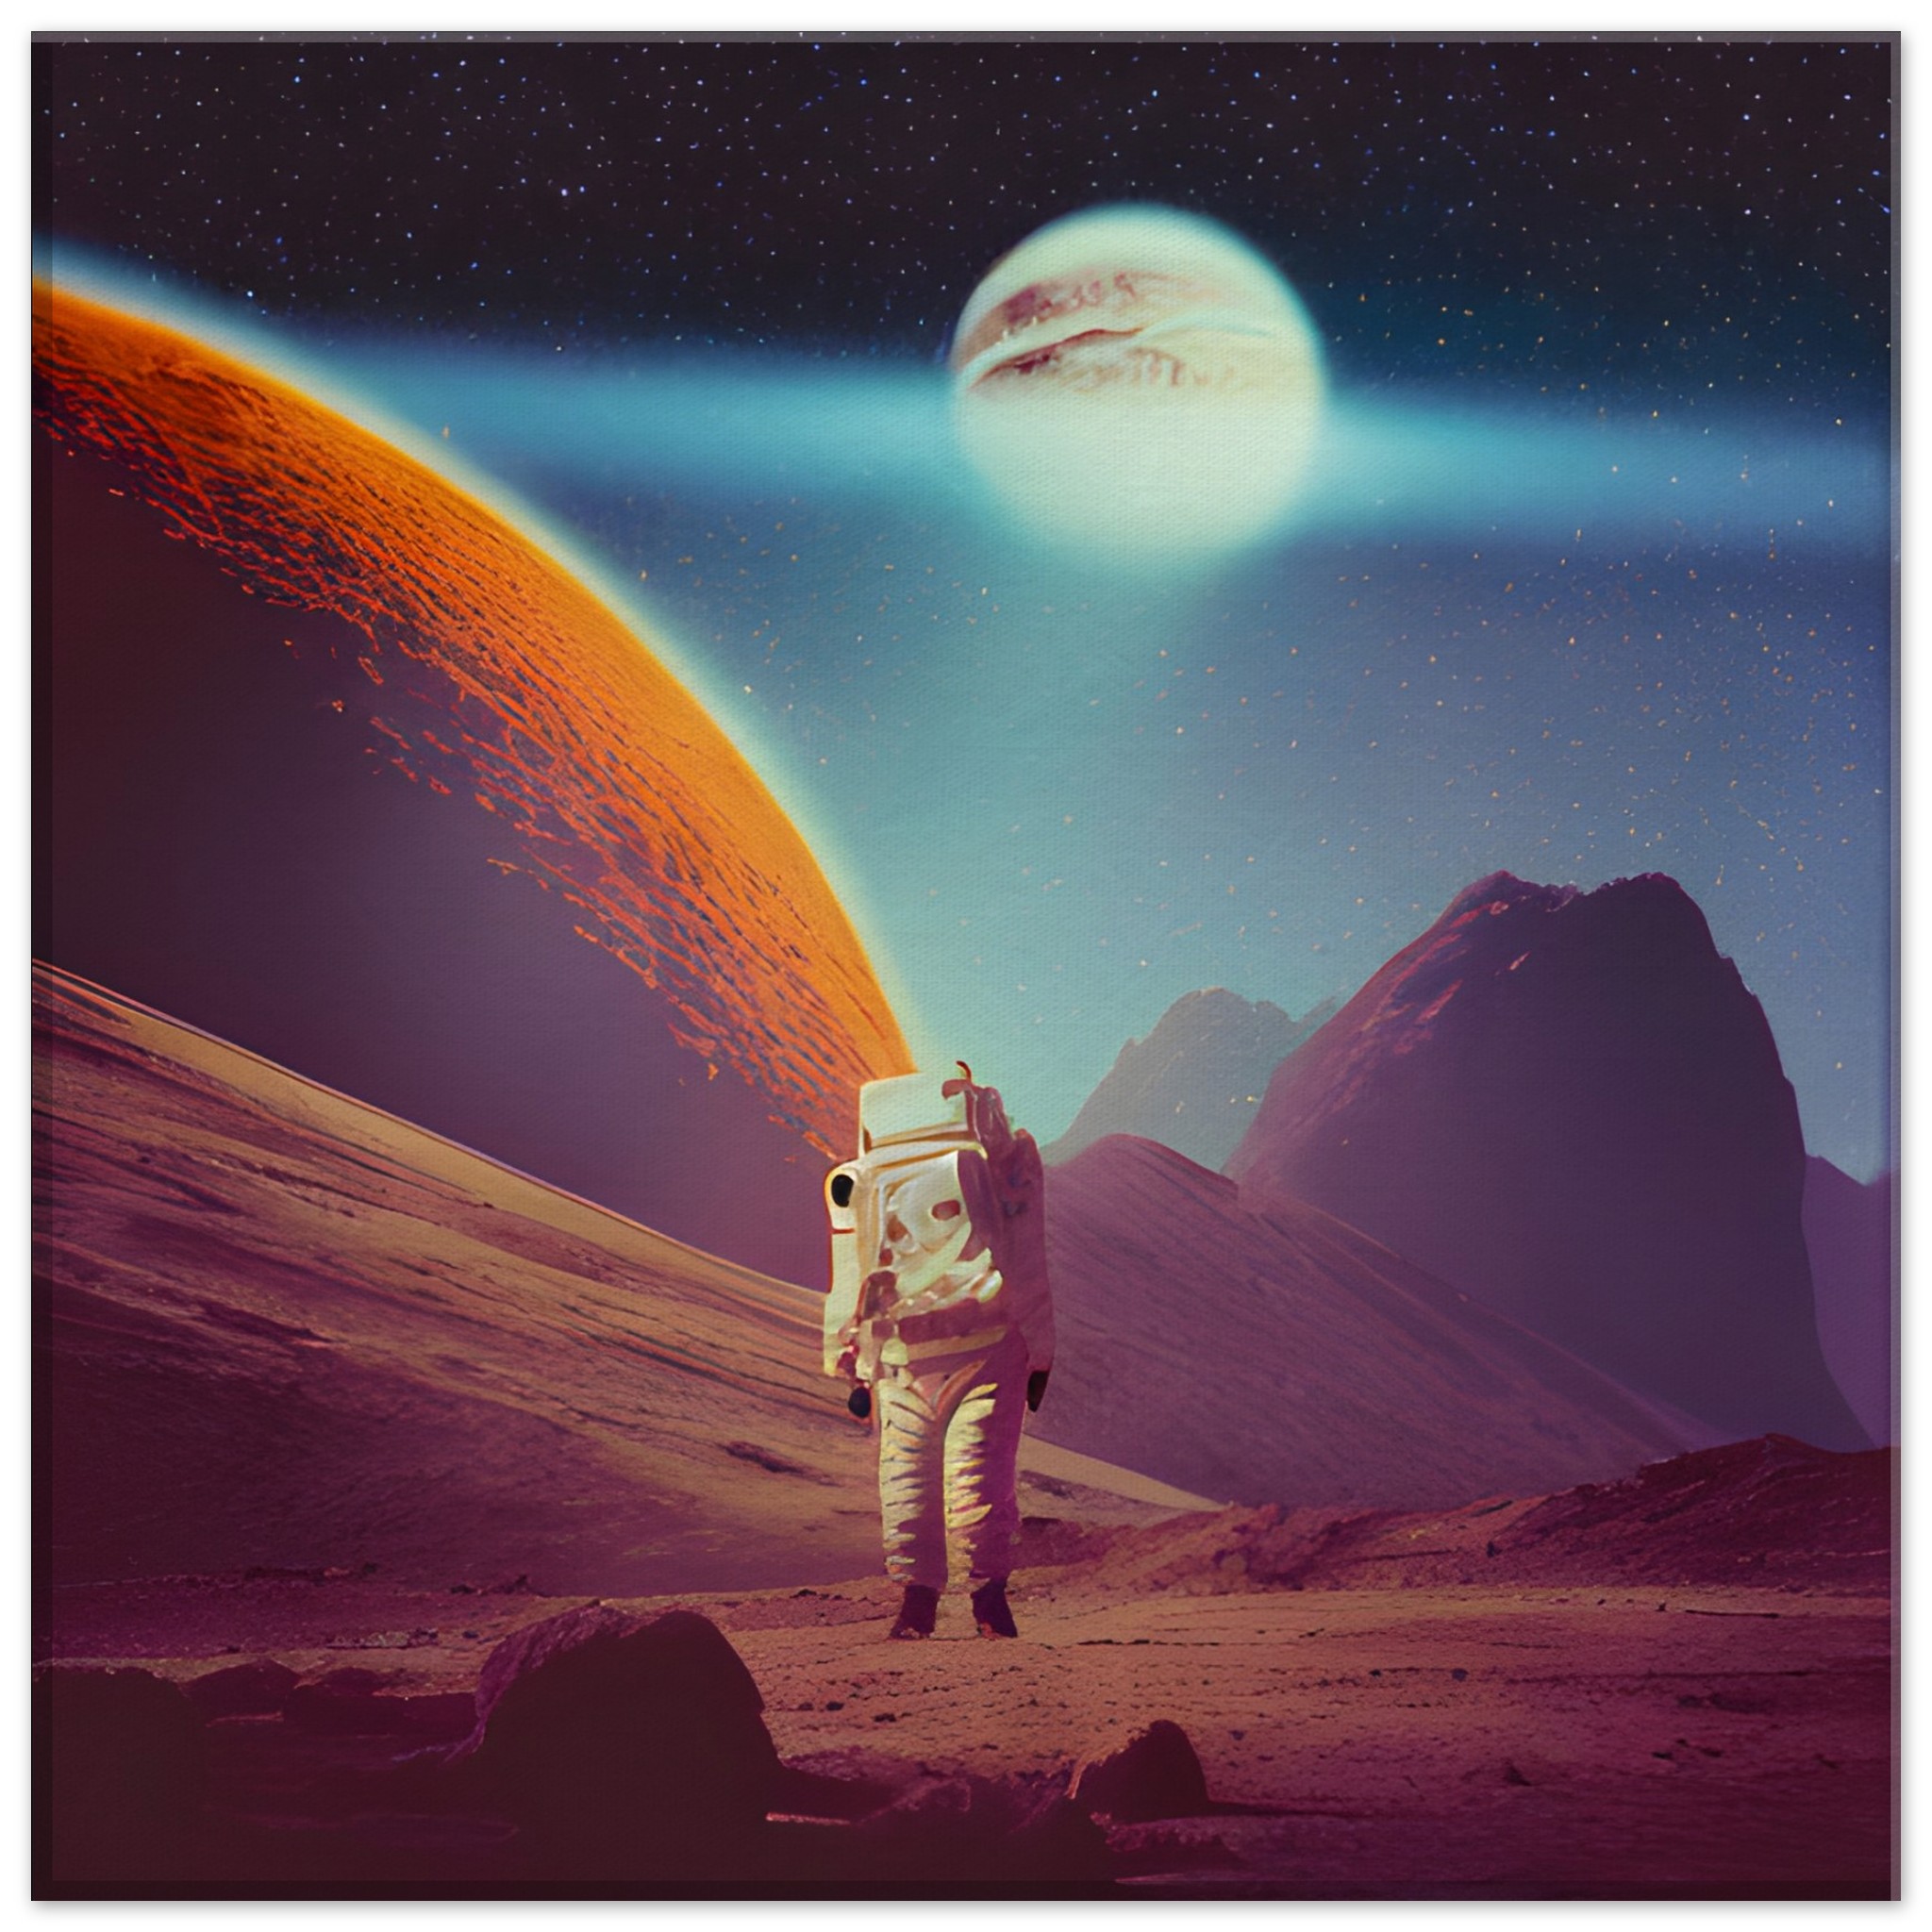 Astronaut walking on another planet canvas print